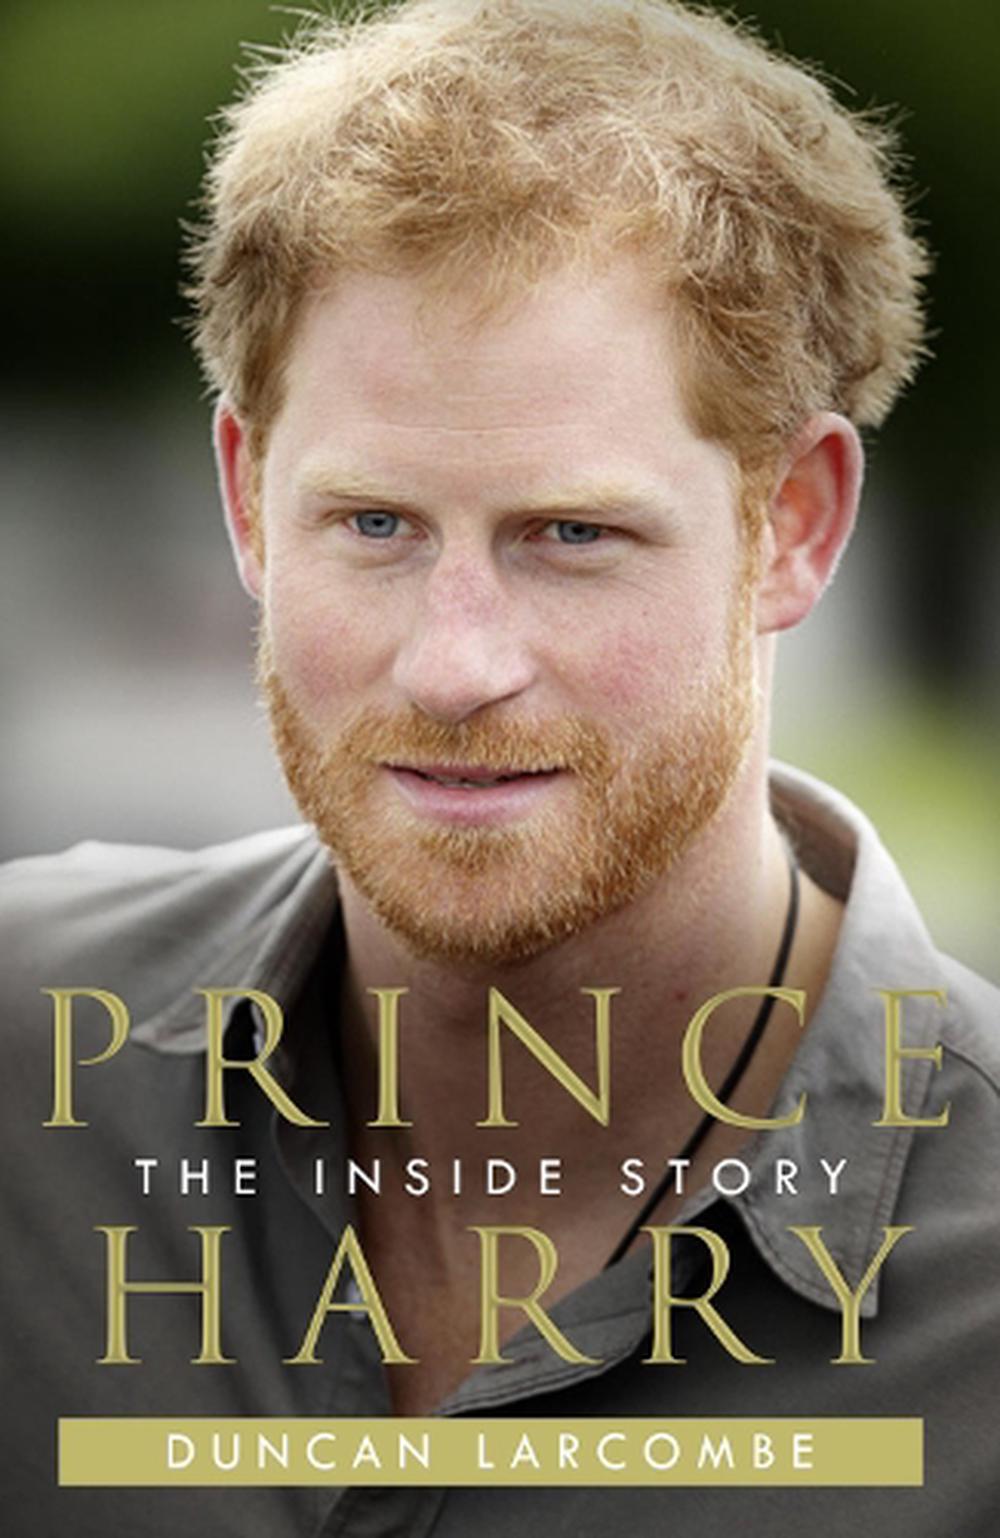 prince harry book review reddit